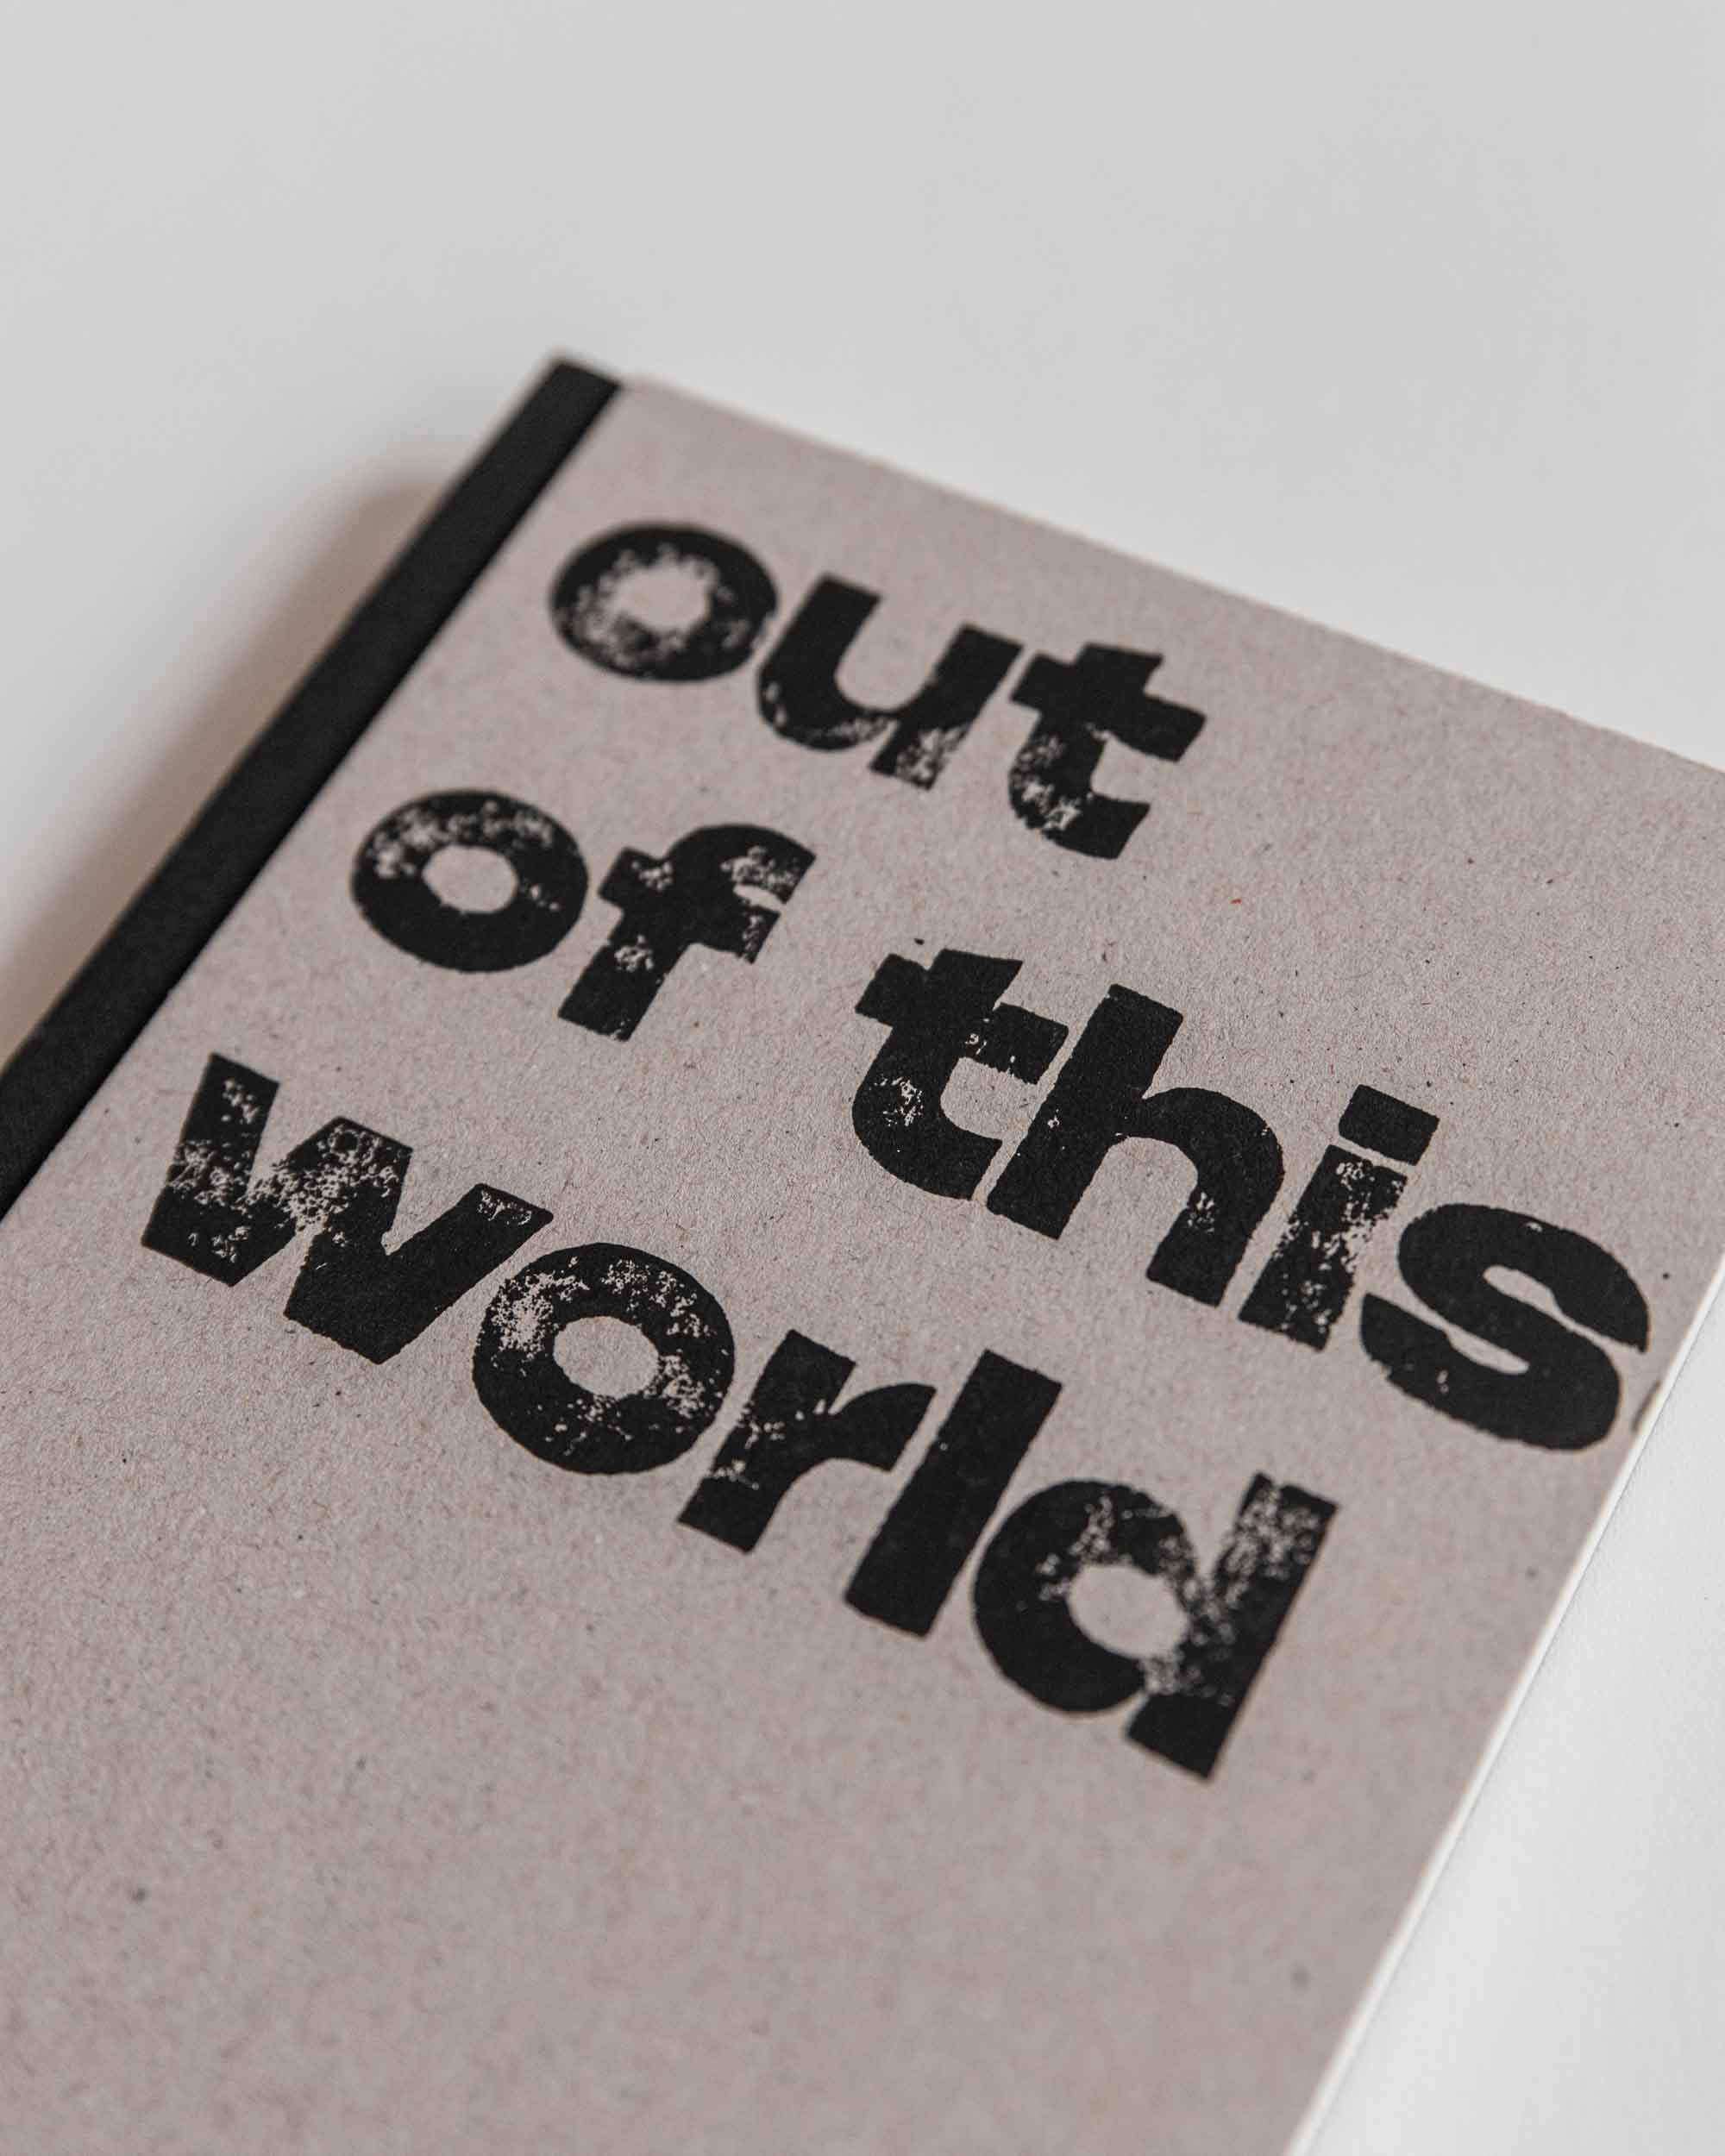 out of this world / notizbuch / johannes 17